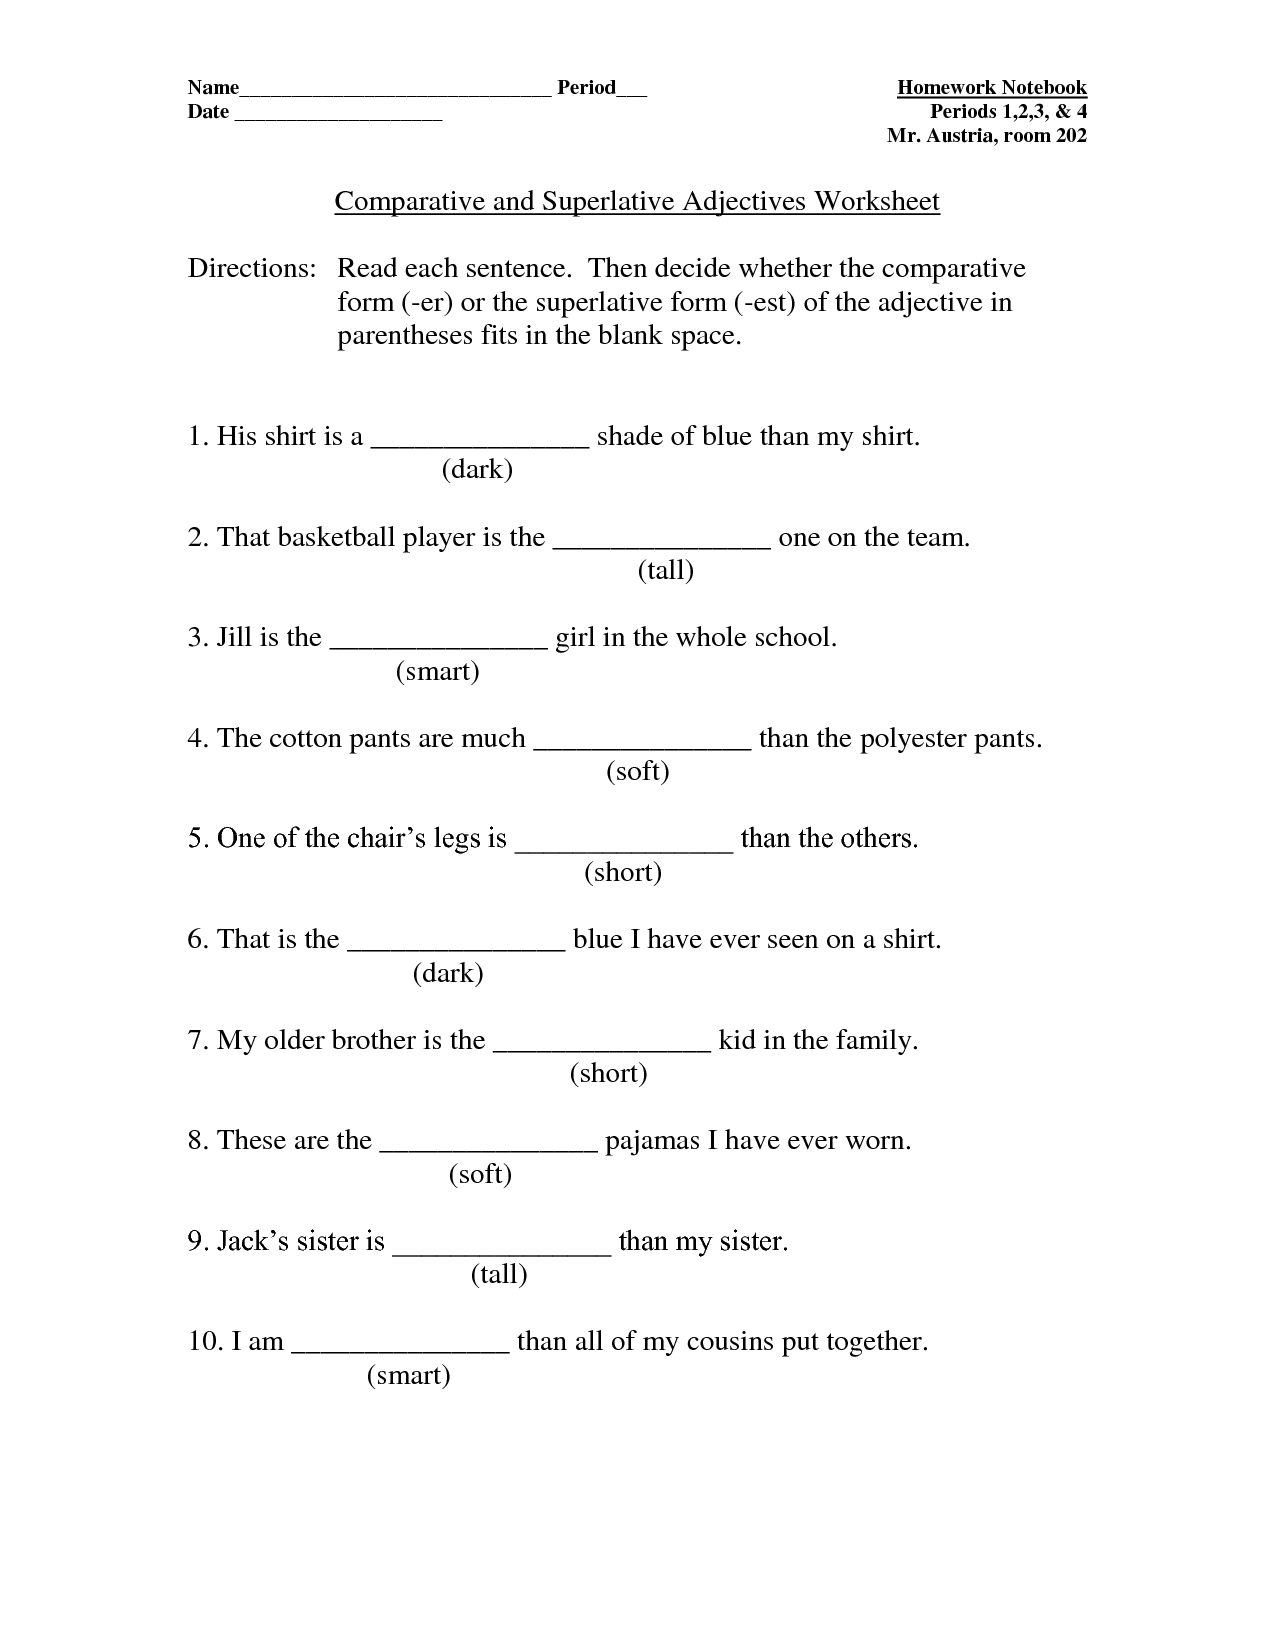 english-worksheets-comparative-adjectives